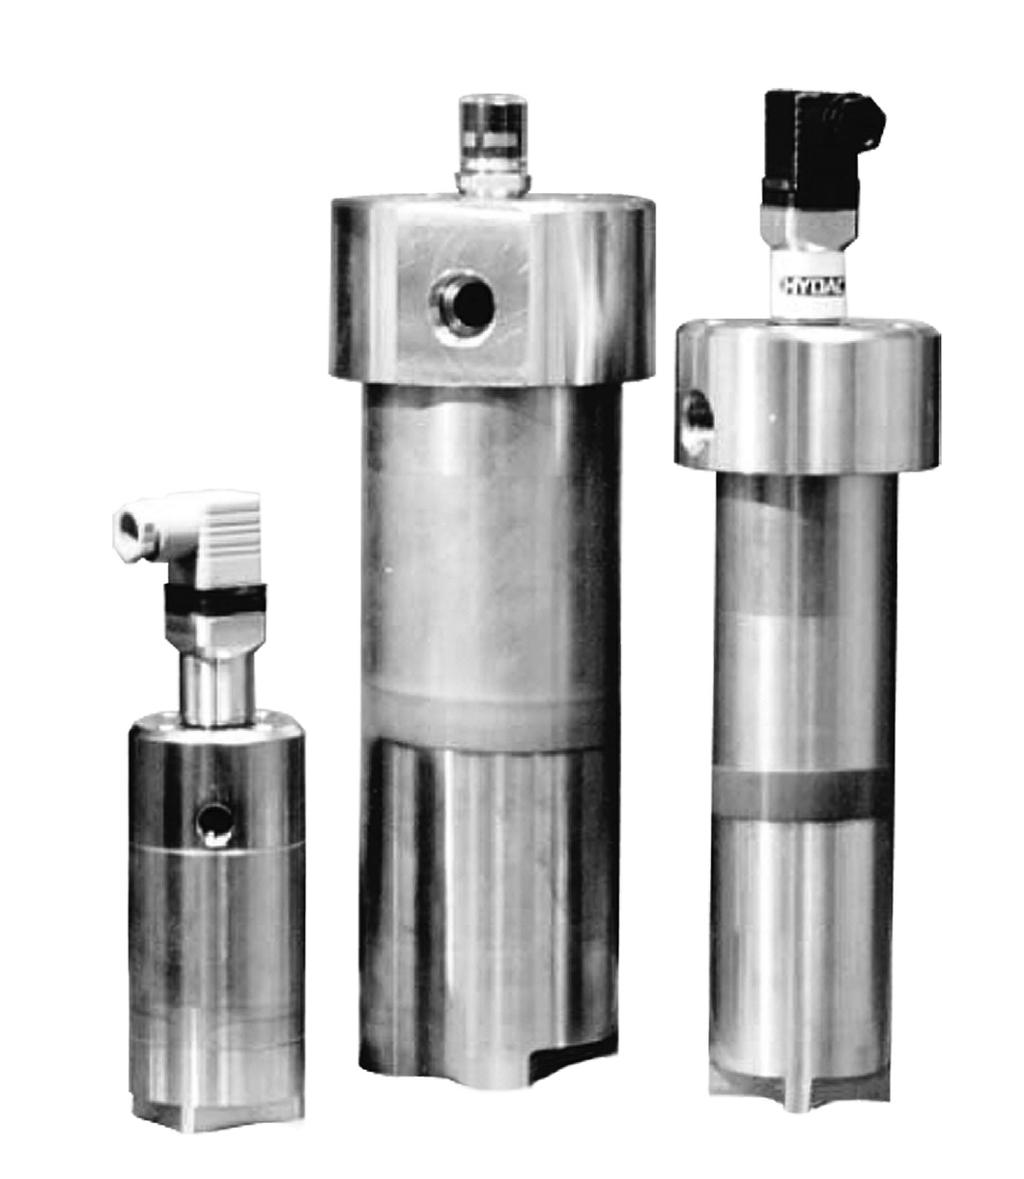 STAINLESS STEEL PRESSURE FILTERS MPSSF / HPSSFH / ACSSF Series Inline Filters Up to 30,000 PSIG up to 40 GPM Hydraulic Symbol A B Design conforms to ISO 13628-6 2 Description The pressure filters